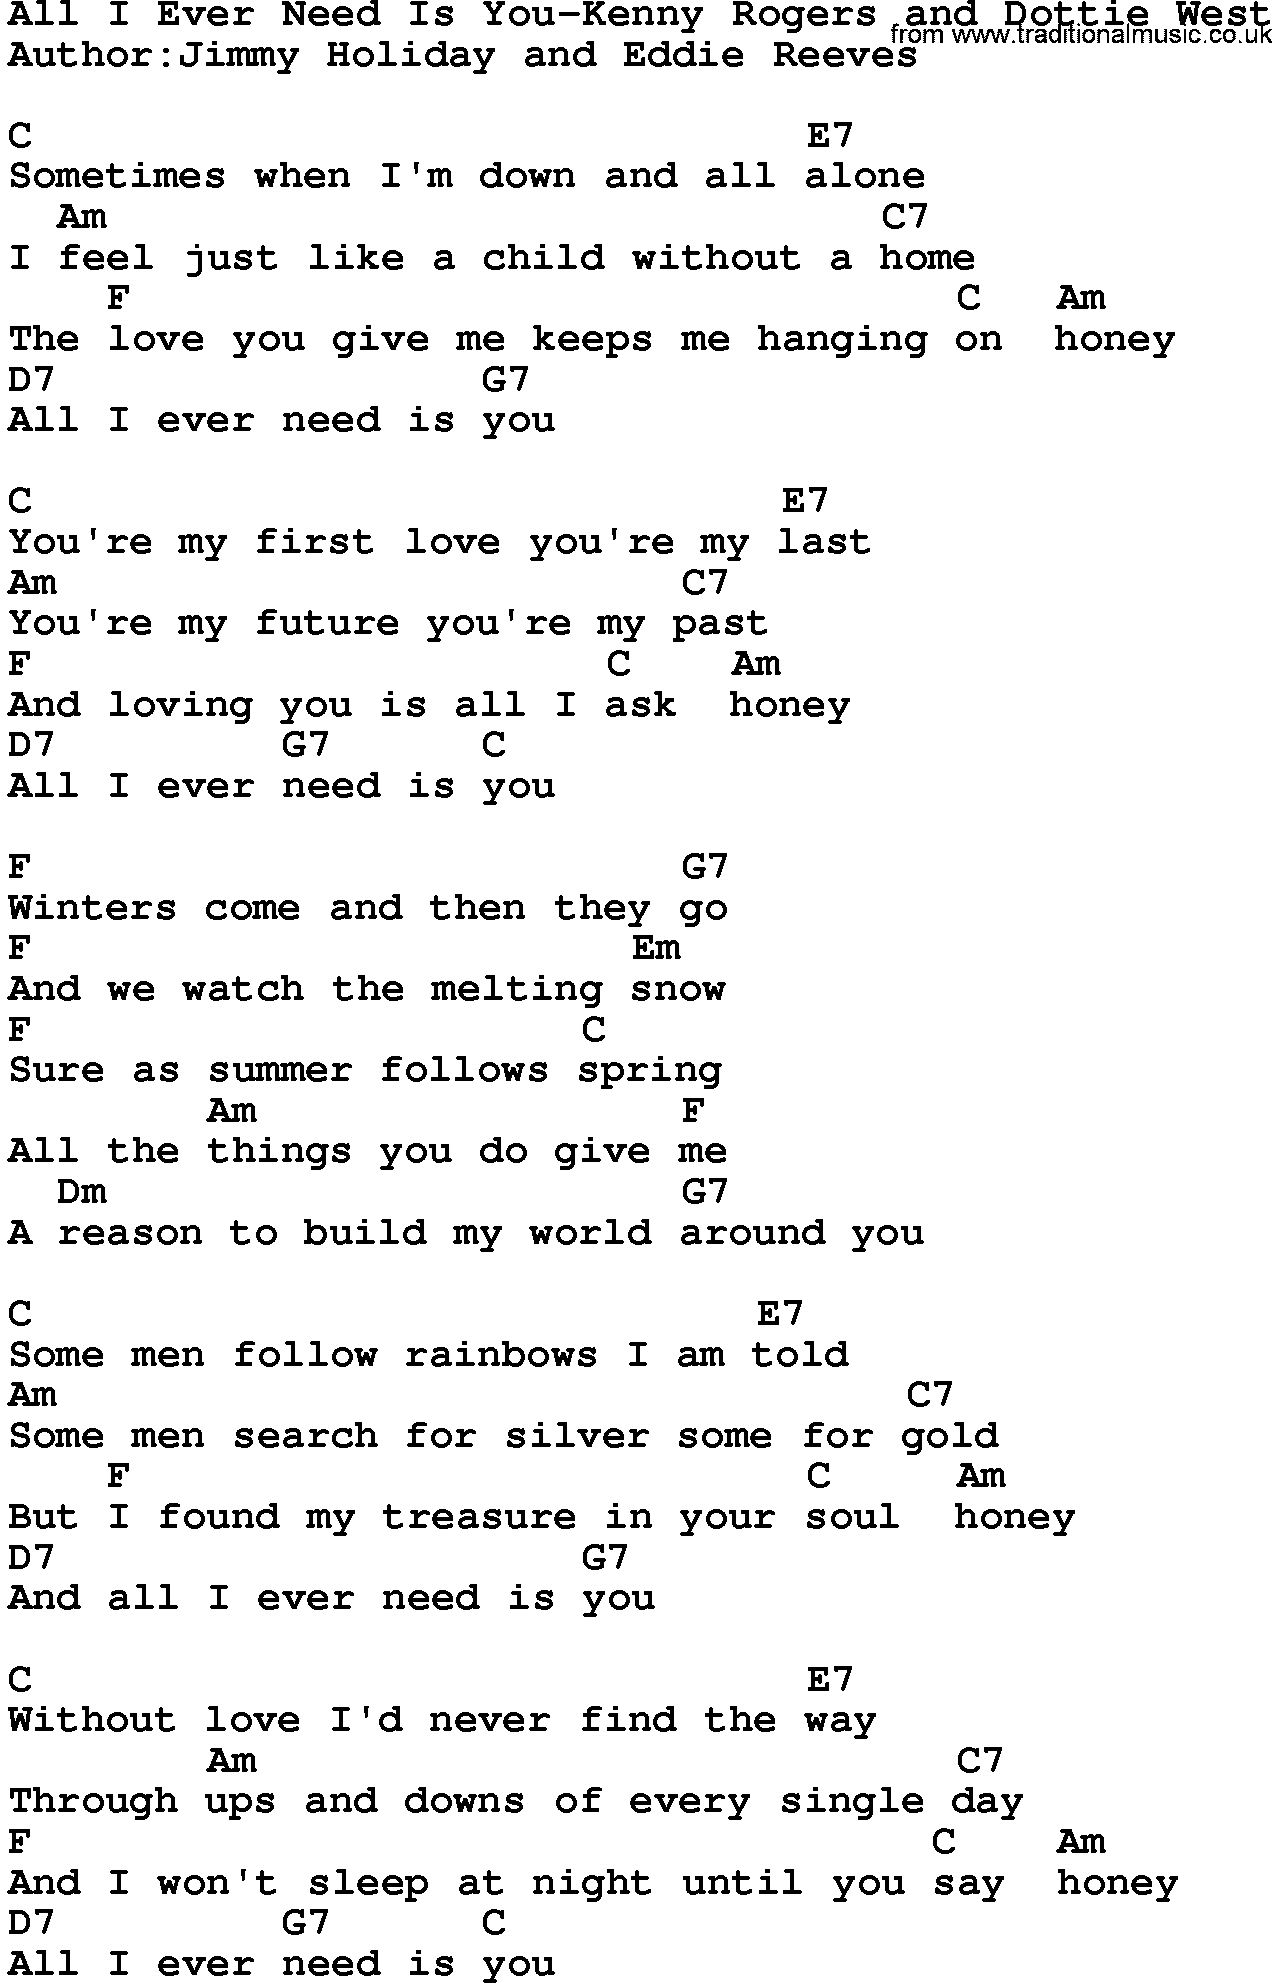 Country music song: All I Ever Need Is You-Kenny Rogers And Dottie West lyrics and chords